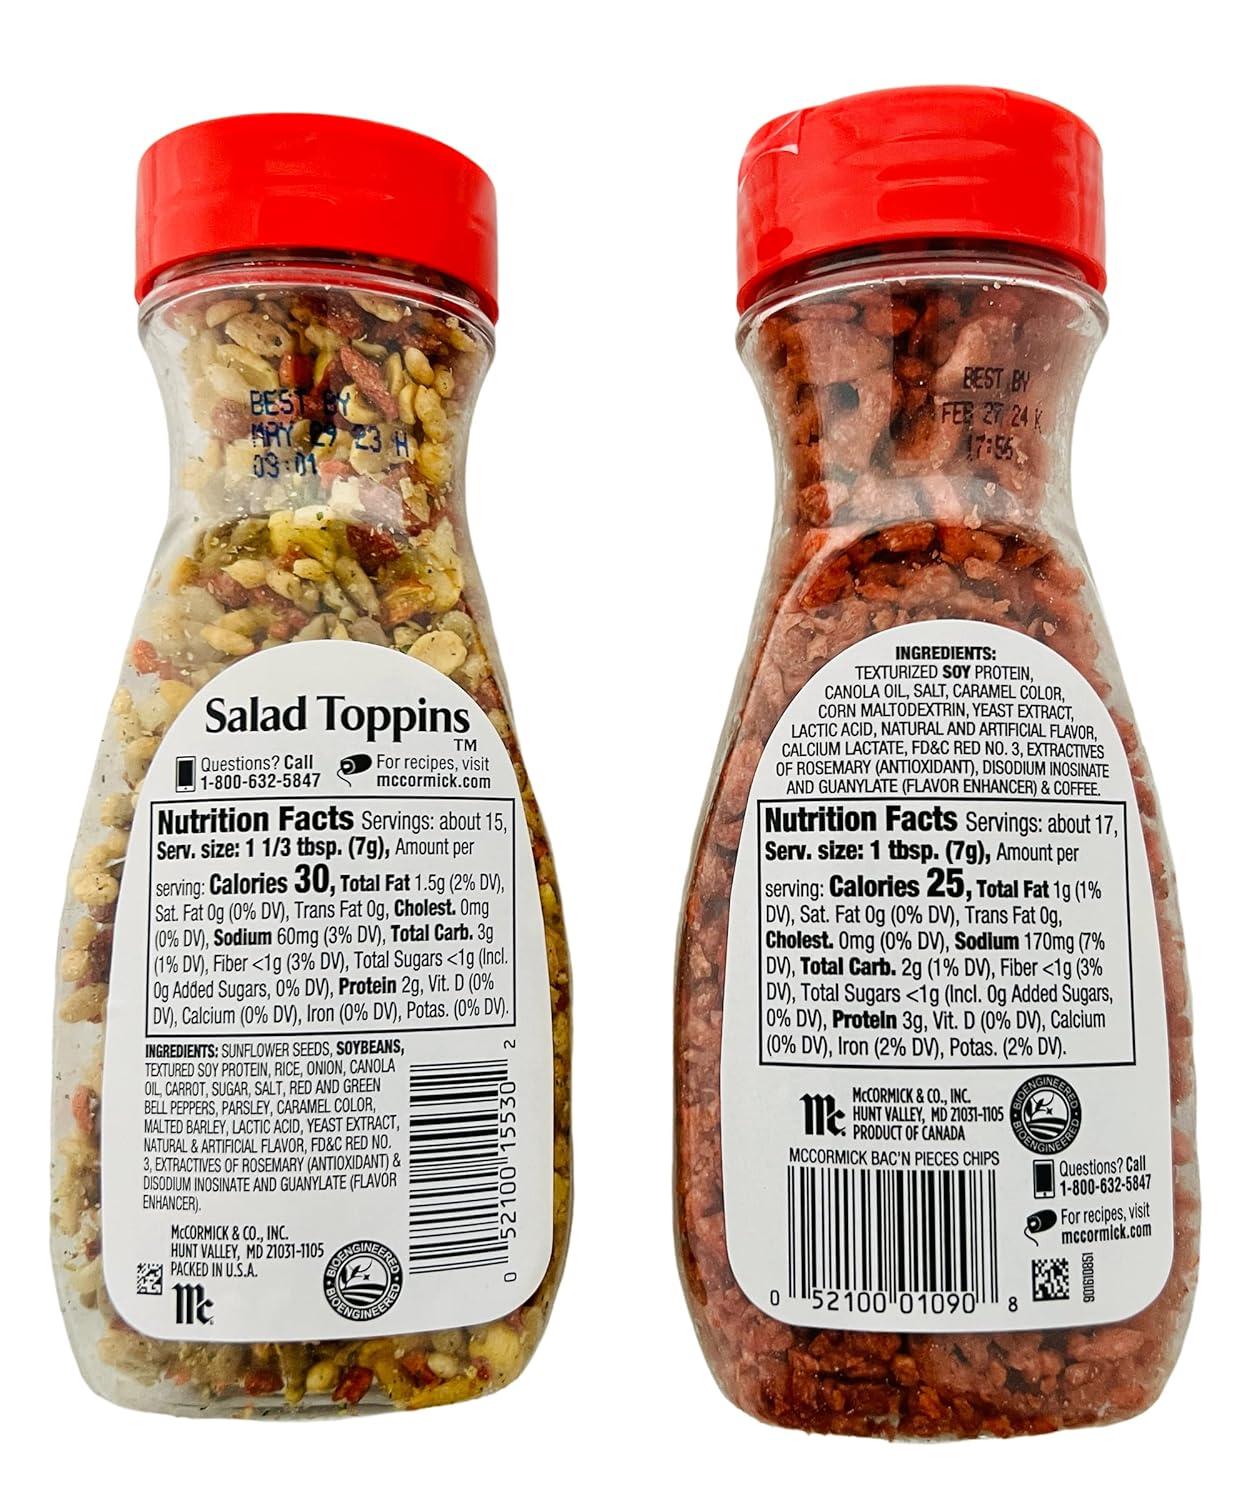 McCormick Crunchy Salad Toppings and Bacon Flavored Chips Bundle (one  container of each kind with storage/leftover bag). Great for topping salads  baked potatoes and more!